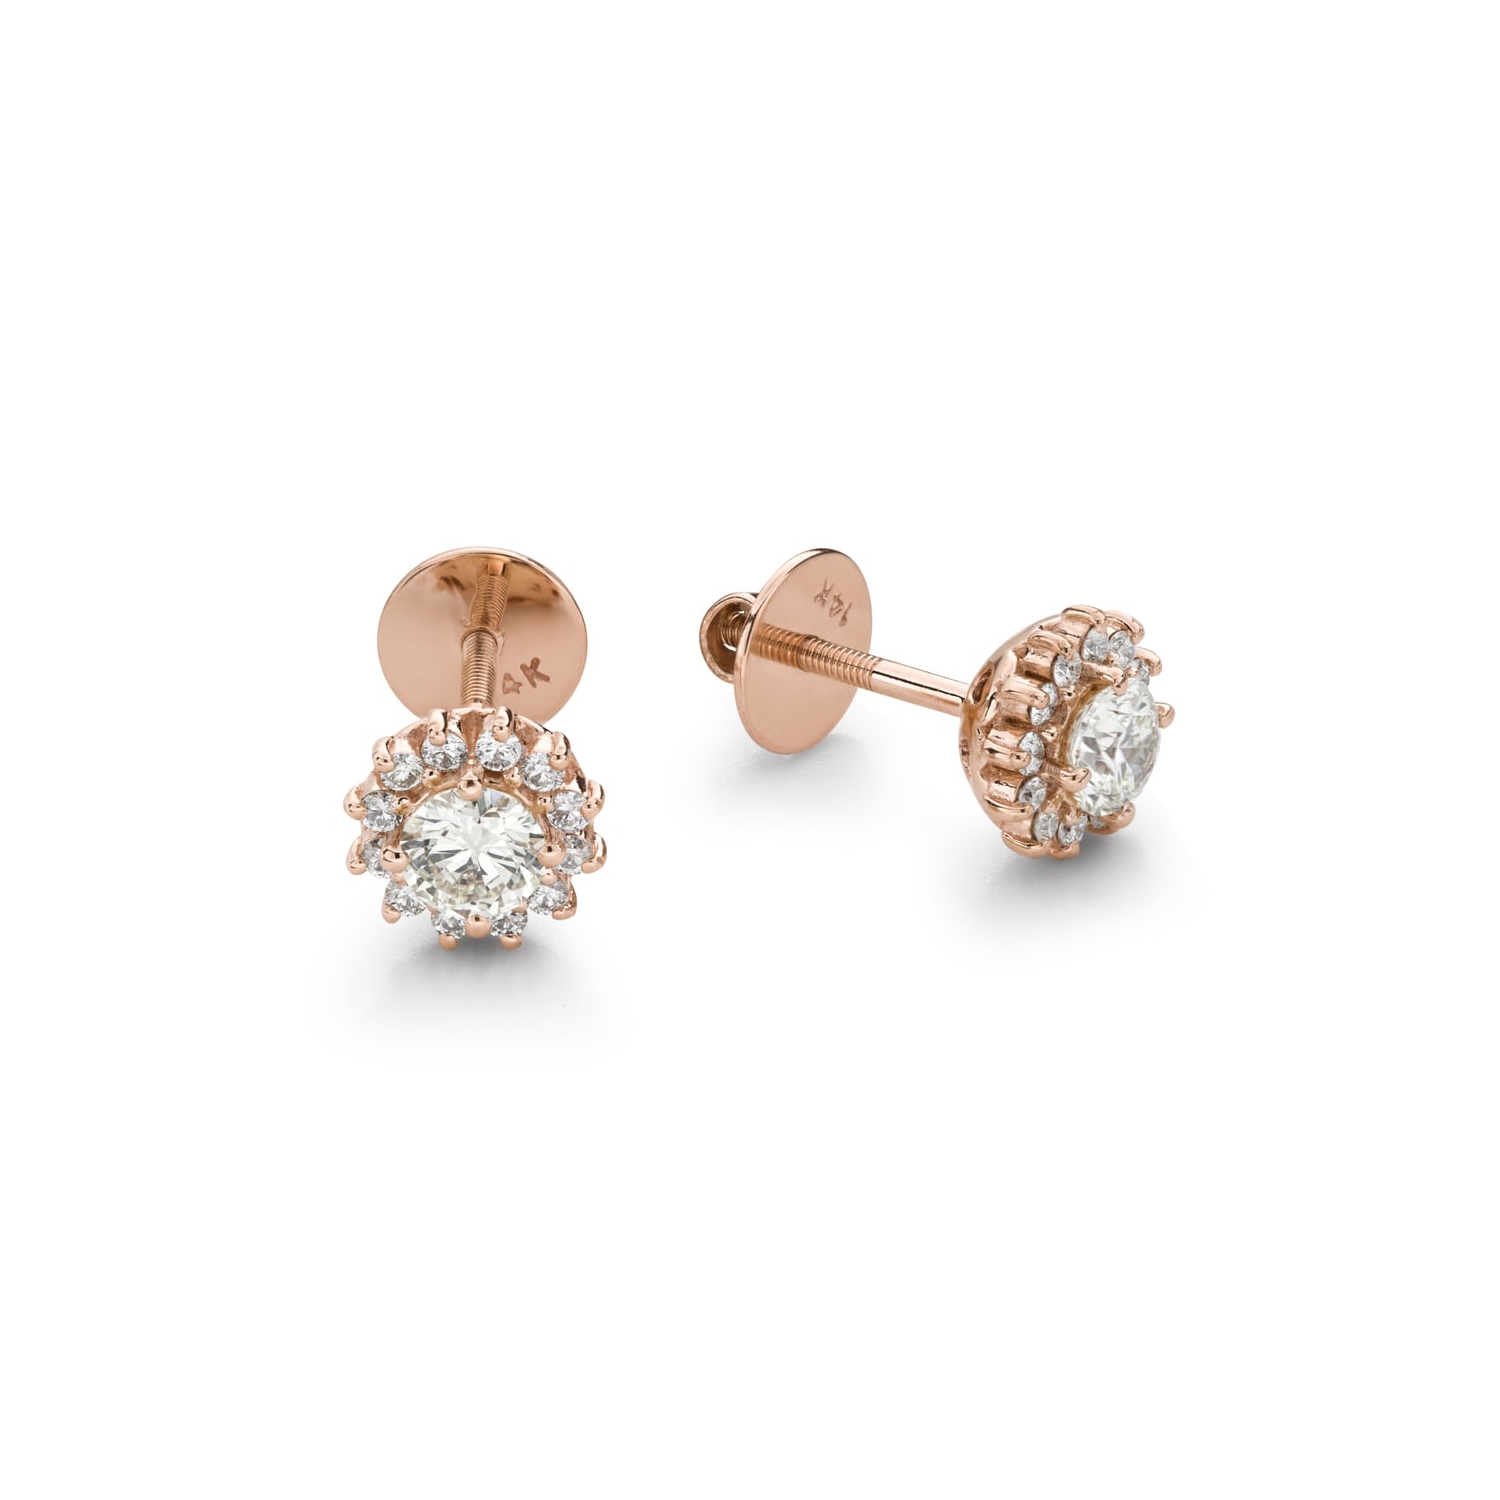 Gold earrings with brilliants "Elegance 28"